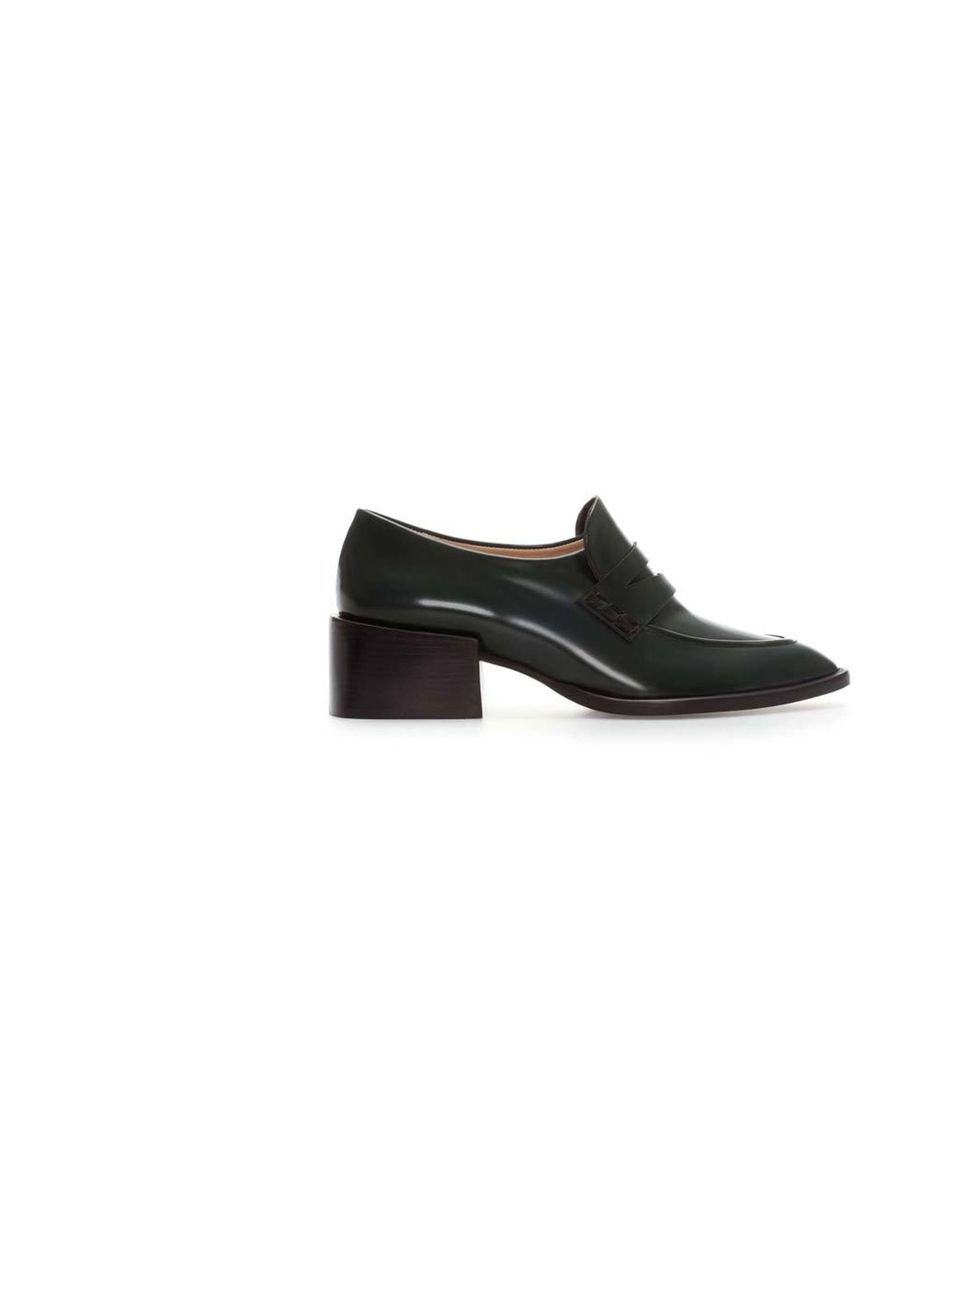 <p>Add a pair of chunky brogues like these from <a href="http://www.zara.com/uk/en/woman/shoes/leather-pointed-moccasin-c269191p1467033.html">Zara</a>, £79.99</p>